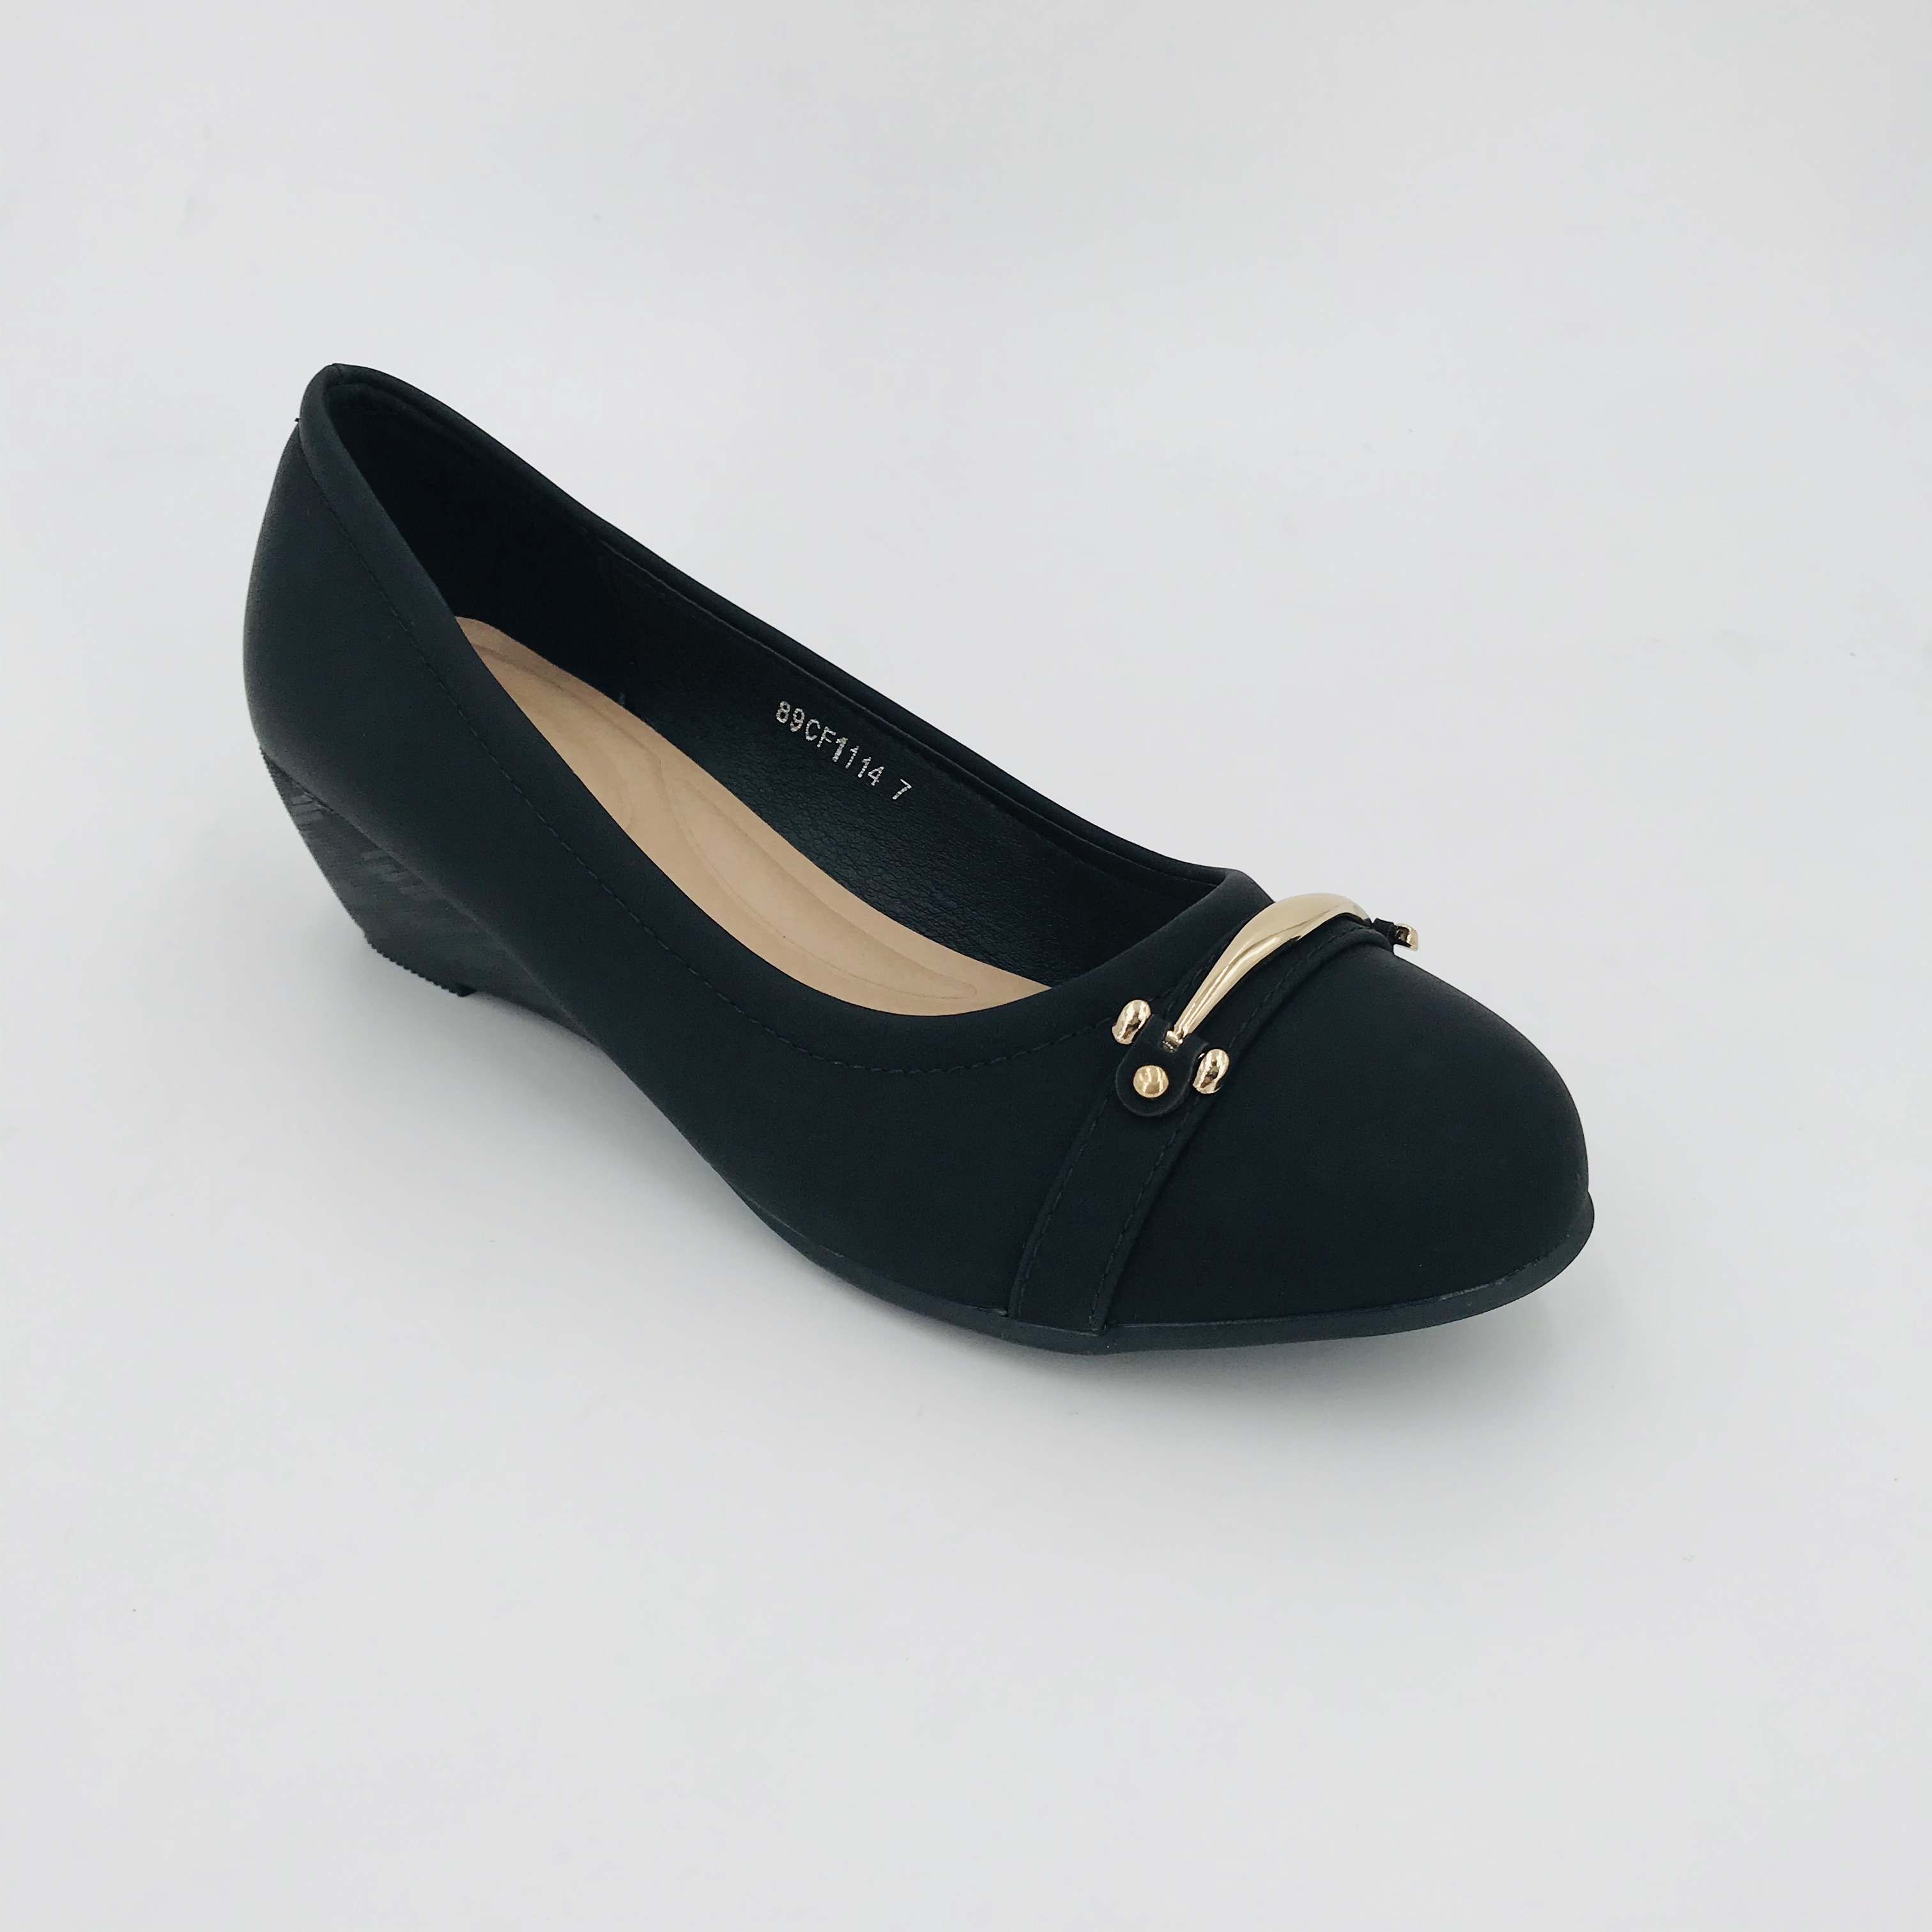 canvas closed toe wedge shoes